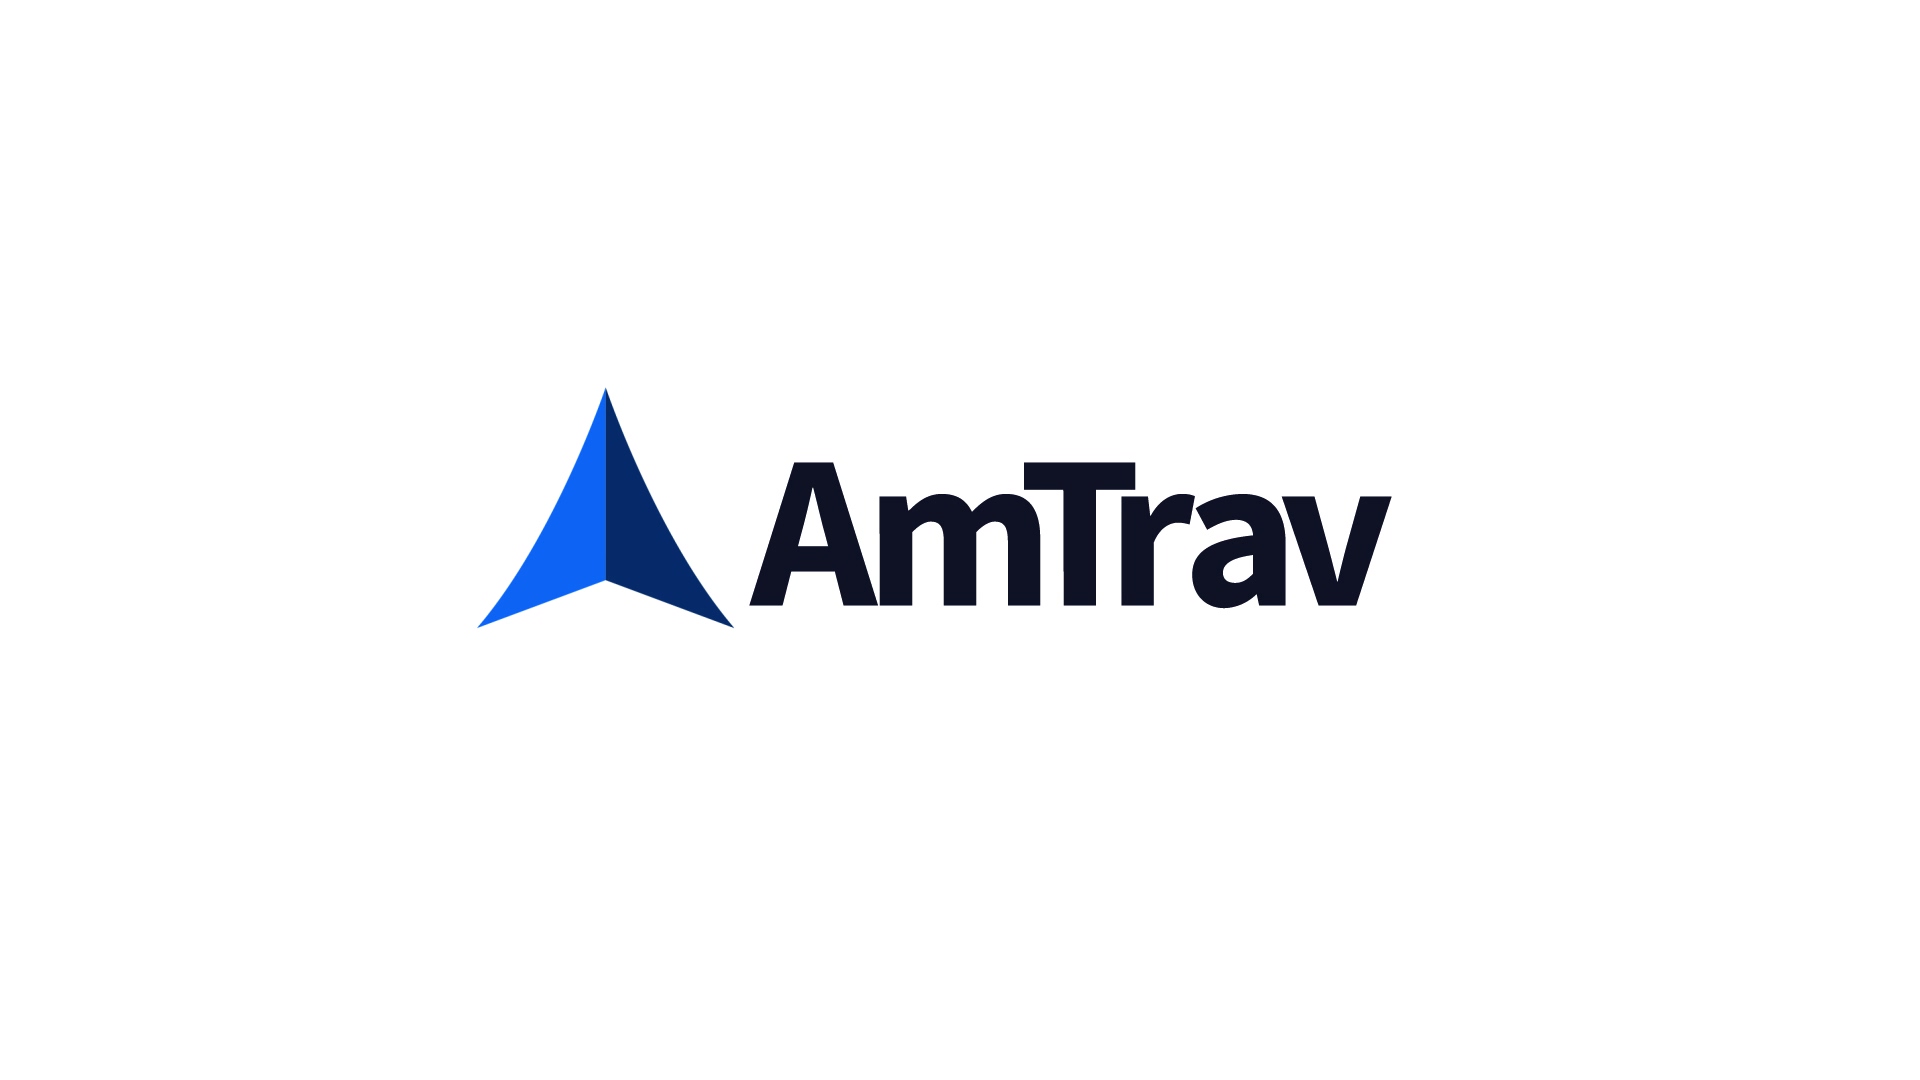 What to Expect from AmTrav in 2022